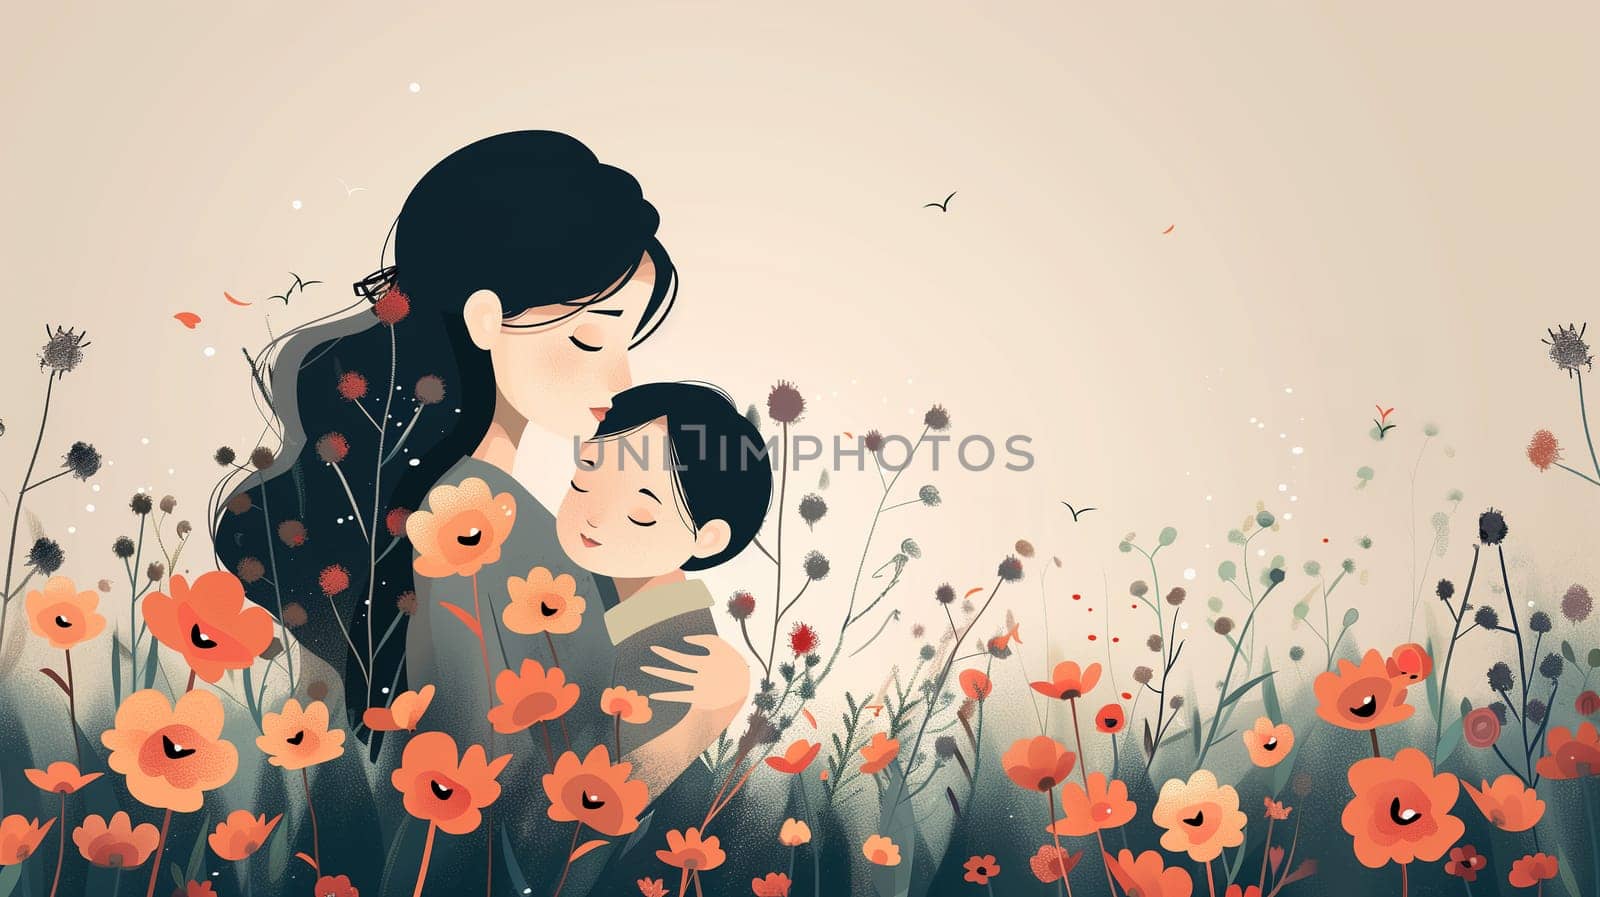 A woman stands in a field of colorful flowers, cradling a child in her arms. The duo is surrounded by nature, with wildflowers blooming all around them.